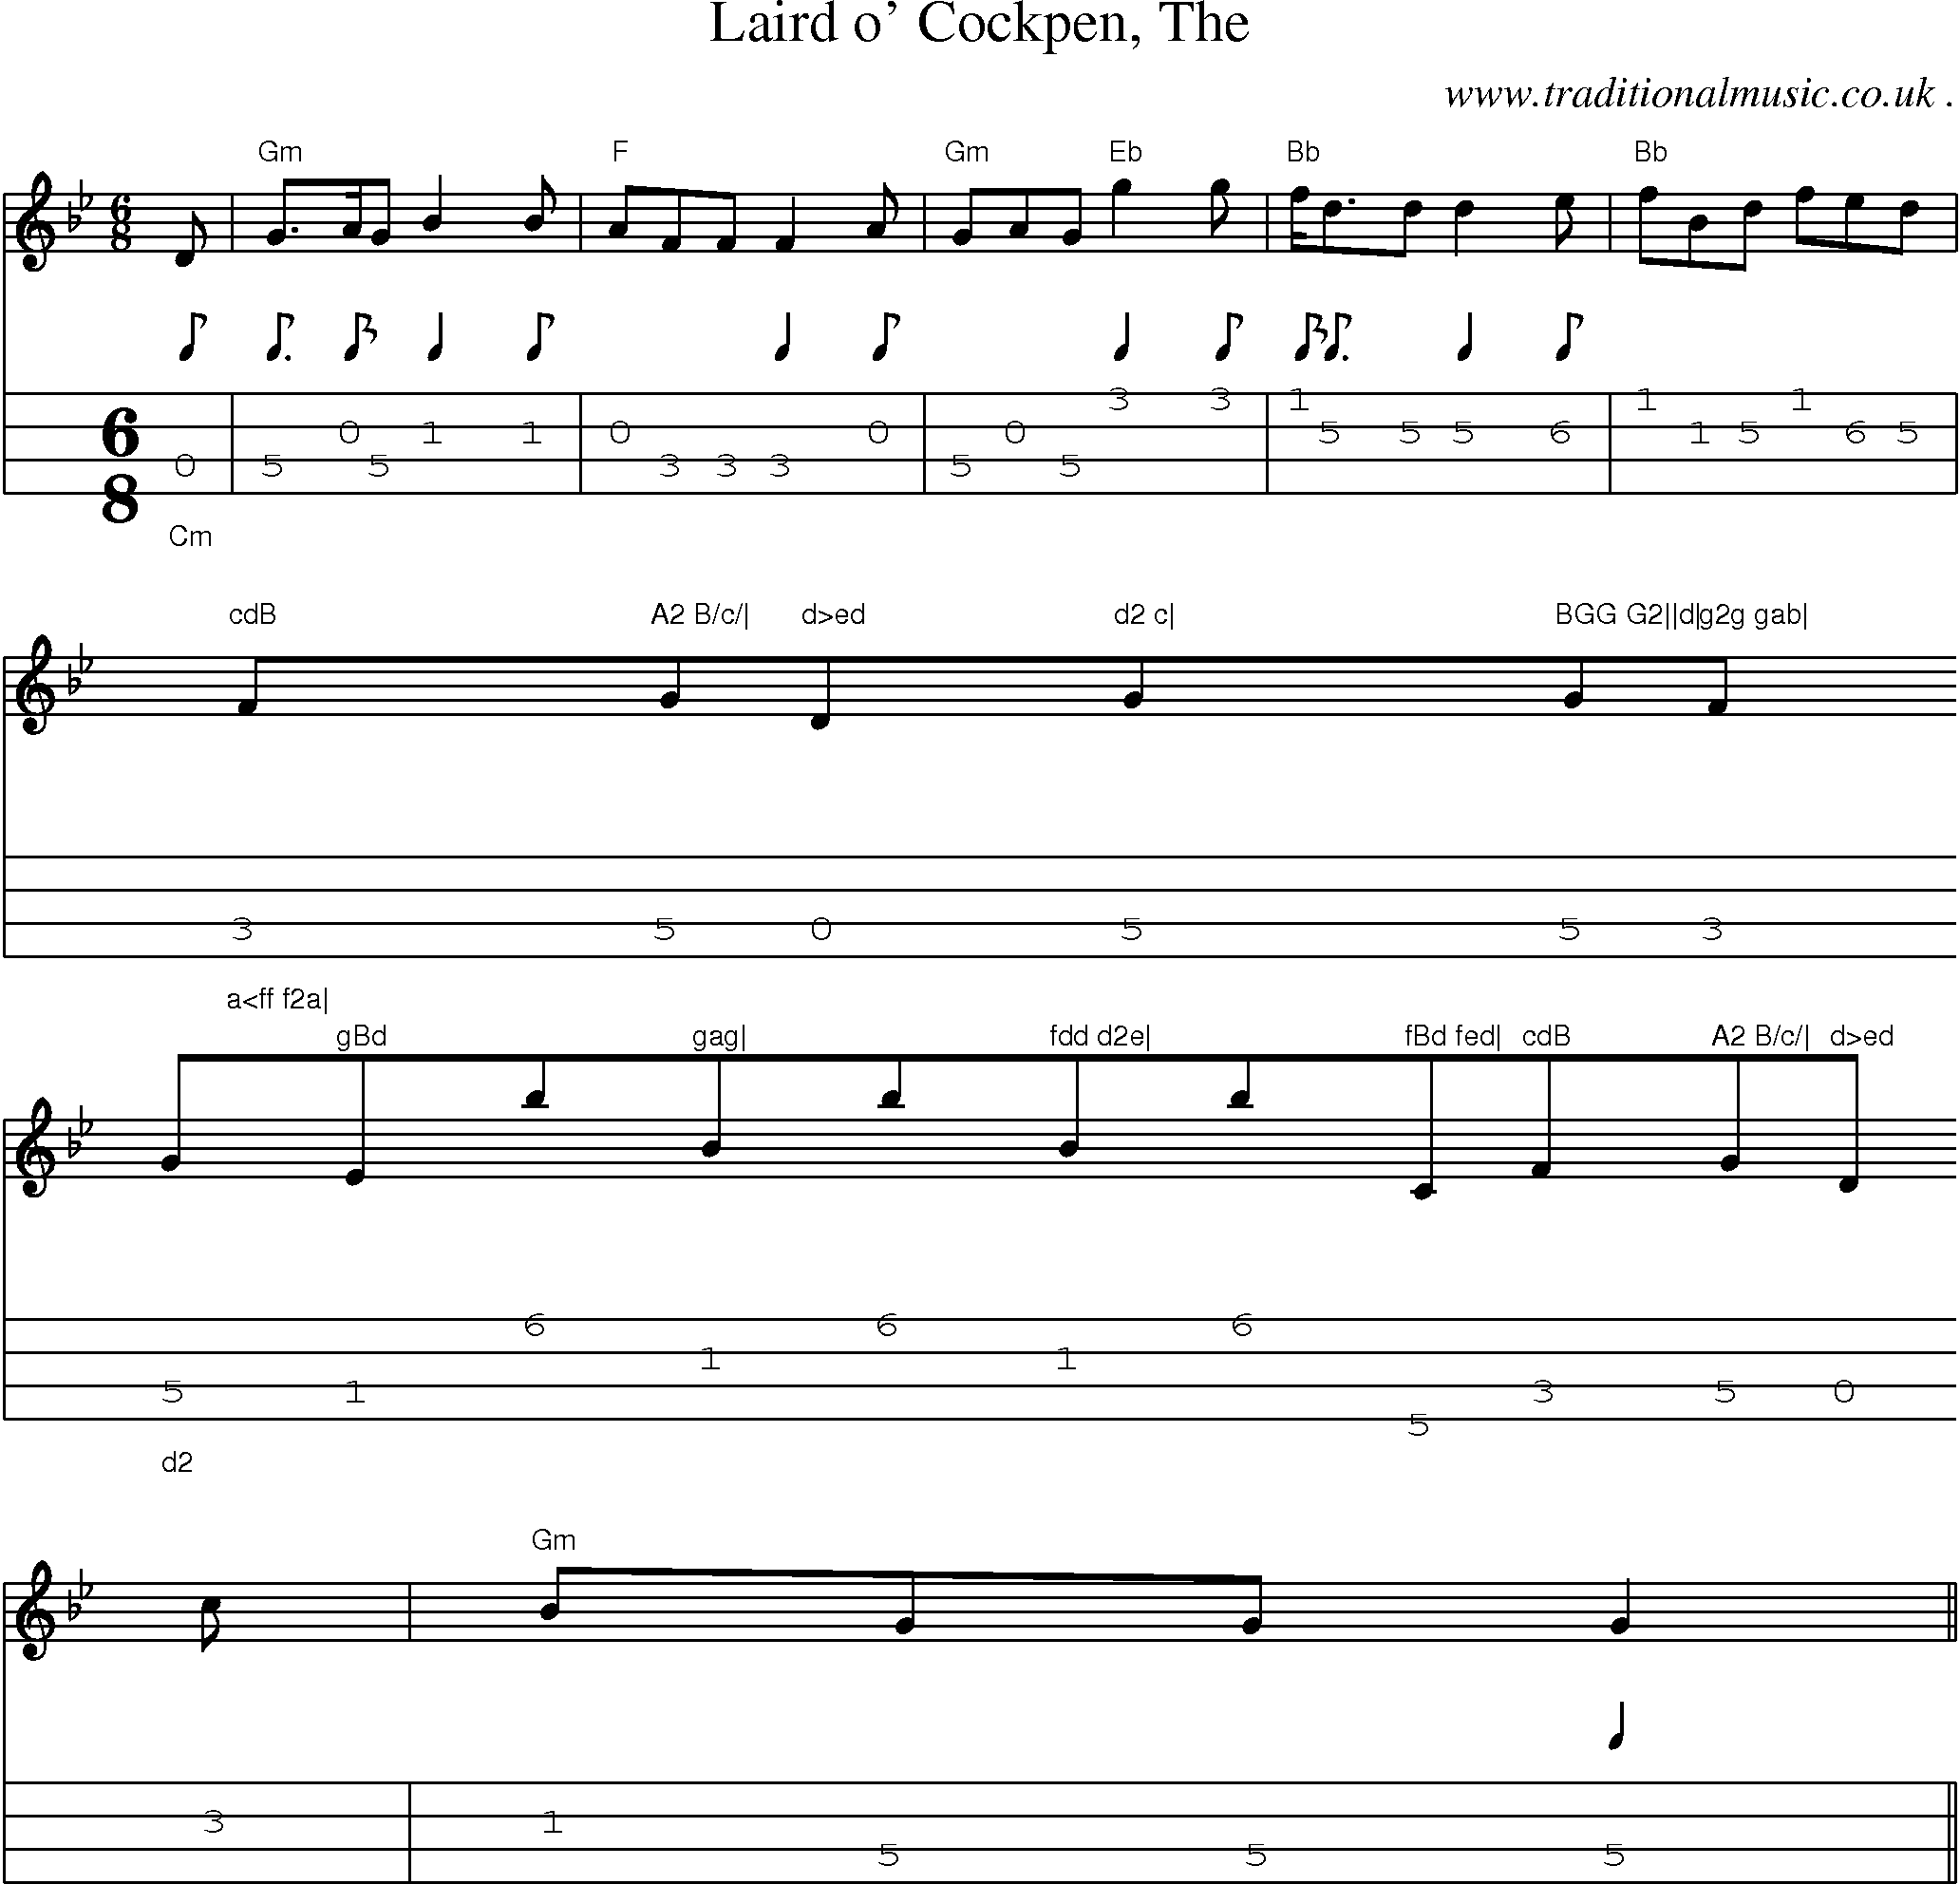 Sheet-music  score, Chords and Mandolin Tabs for Laird O Cockpen The